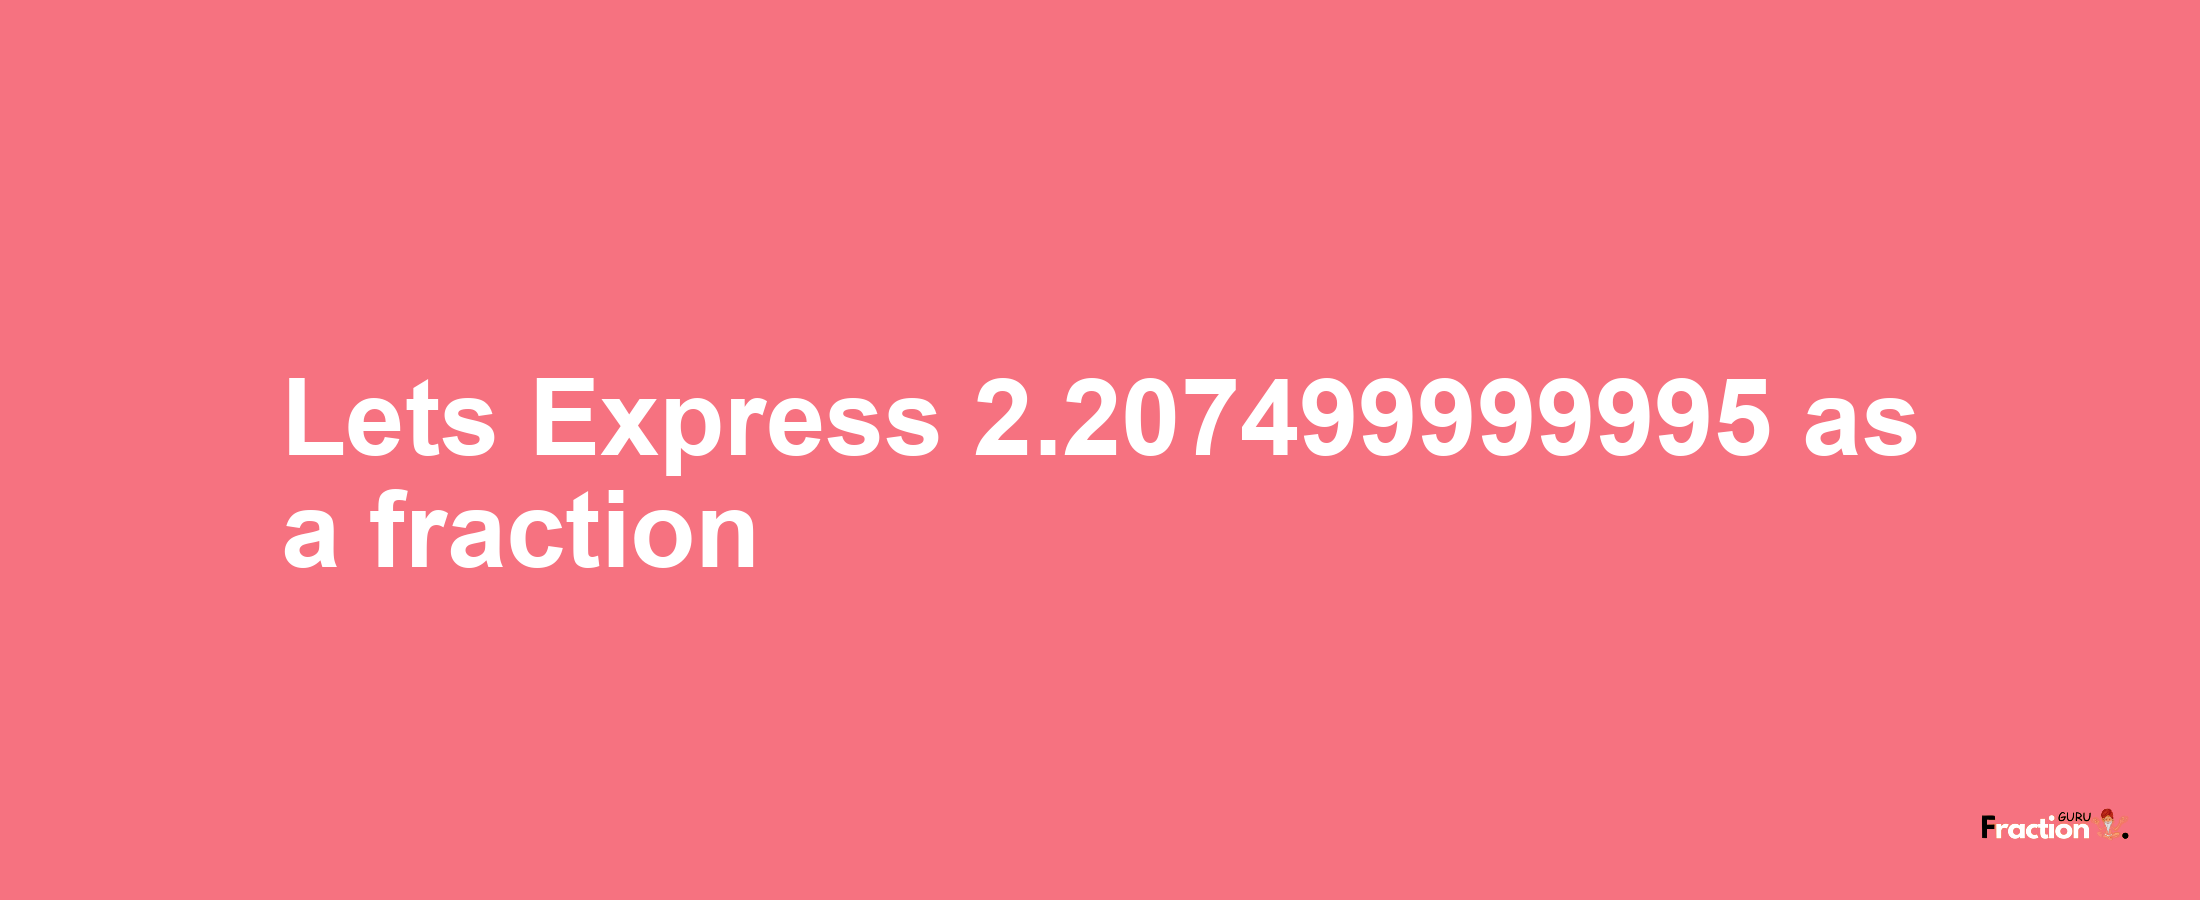 Lets Express 2.207499999995 as afraction